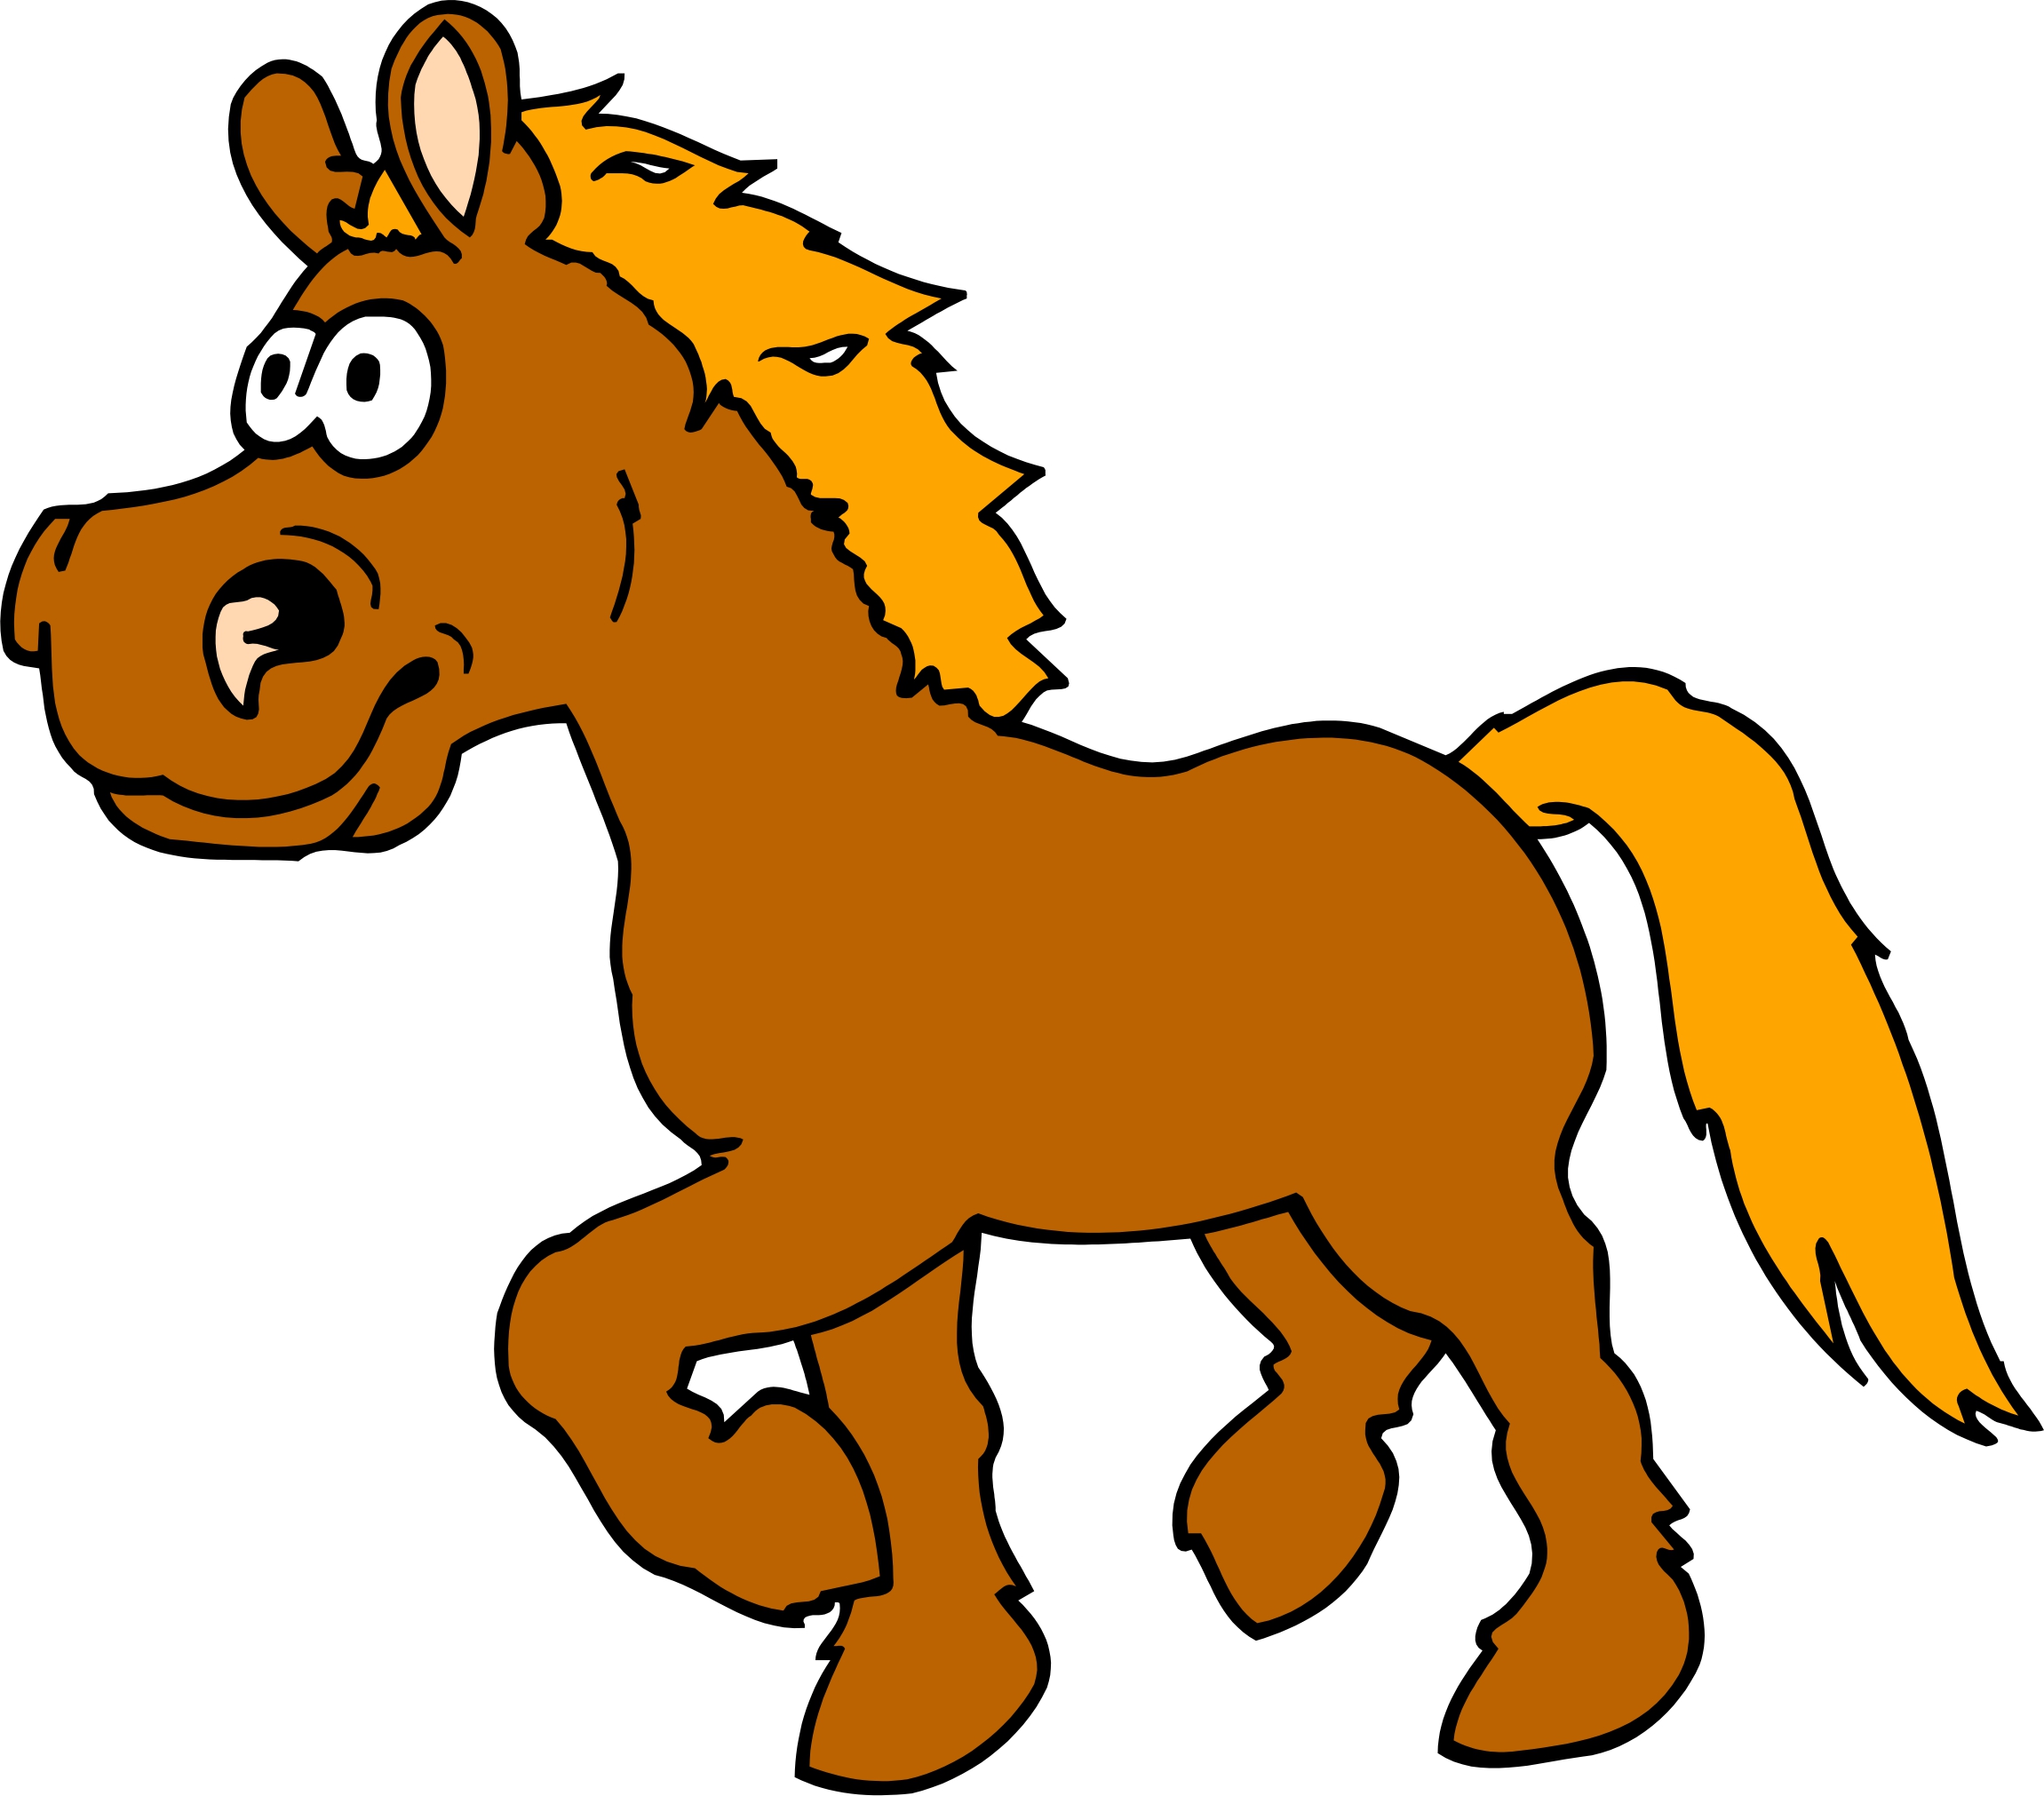 Horse Pictures Images Wallpapers Photos 2013: Cartoon Horse ...